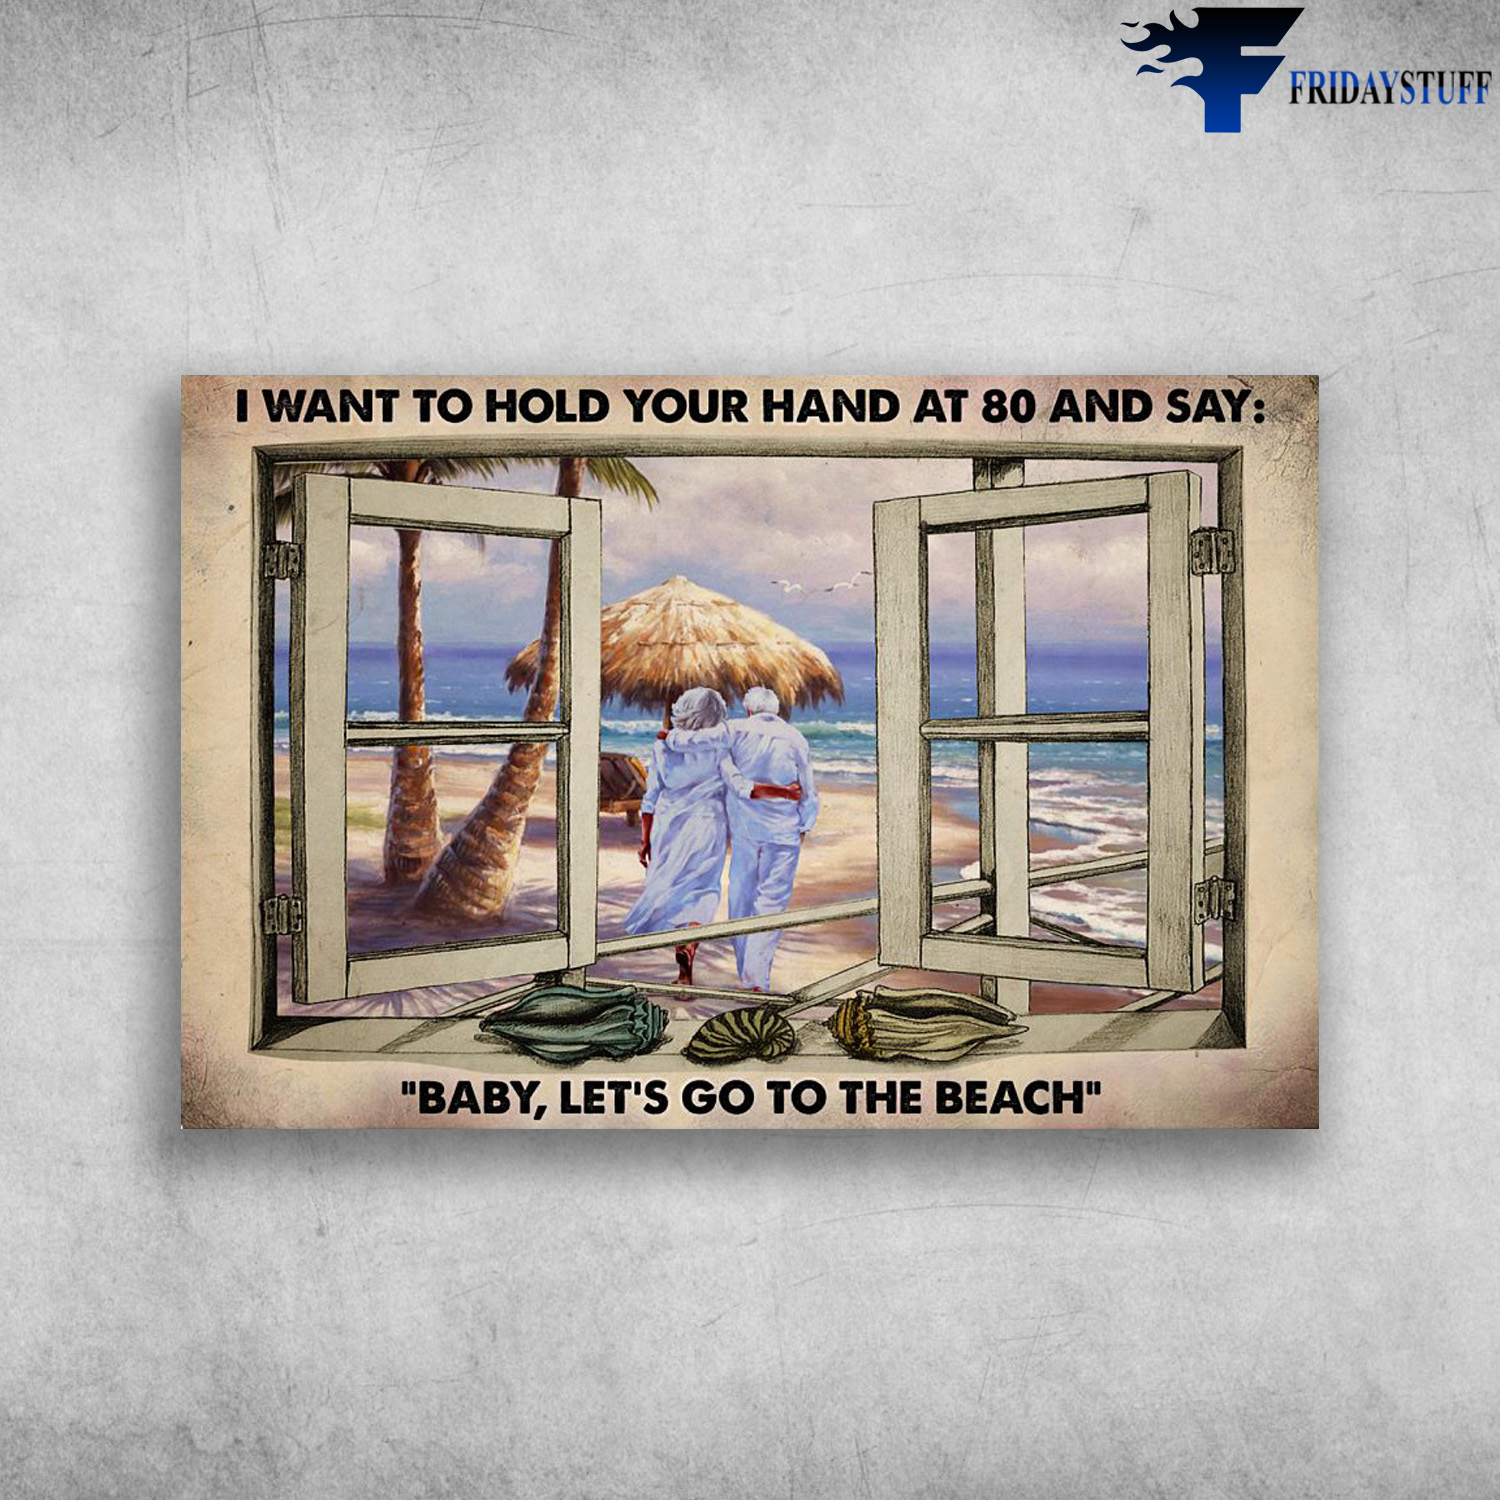 Old Couple To The Beach Window View - I Want To Hold Your Hand At 80 And Say, Baby Let's Go To The Beach